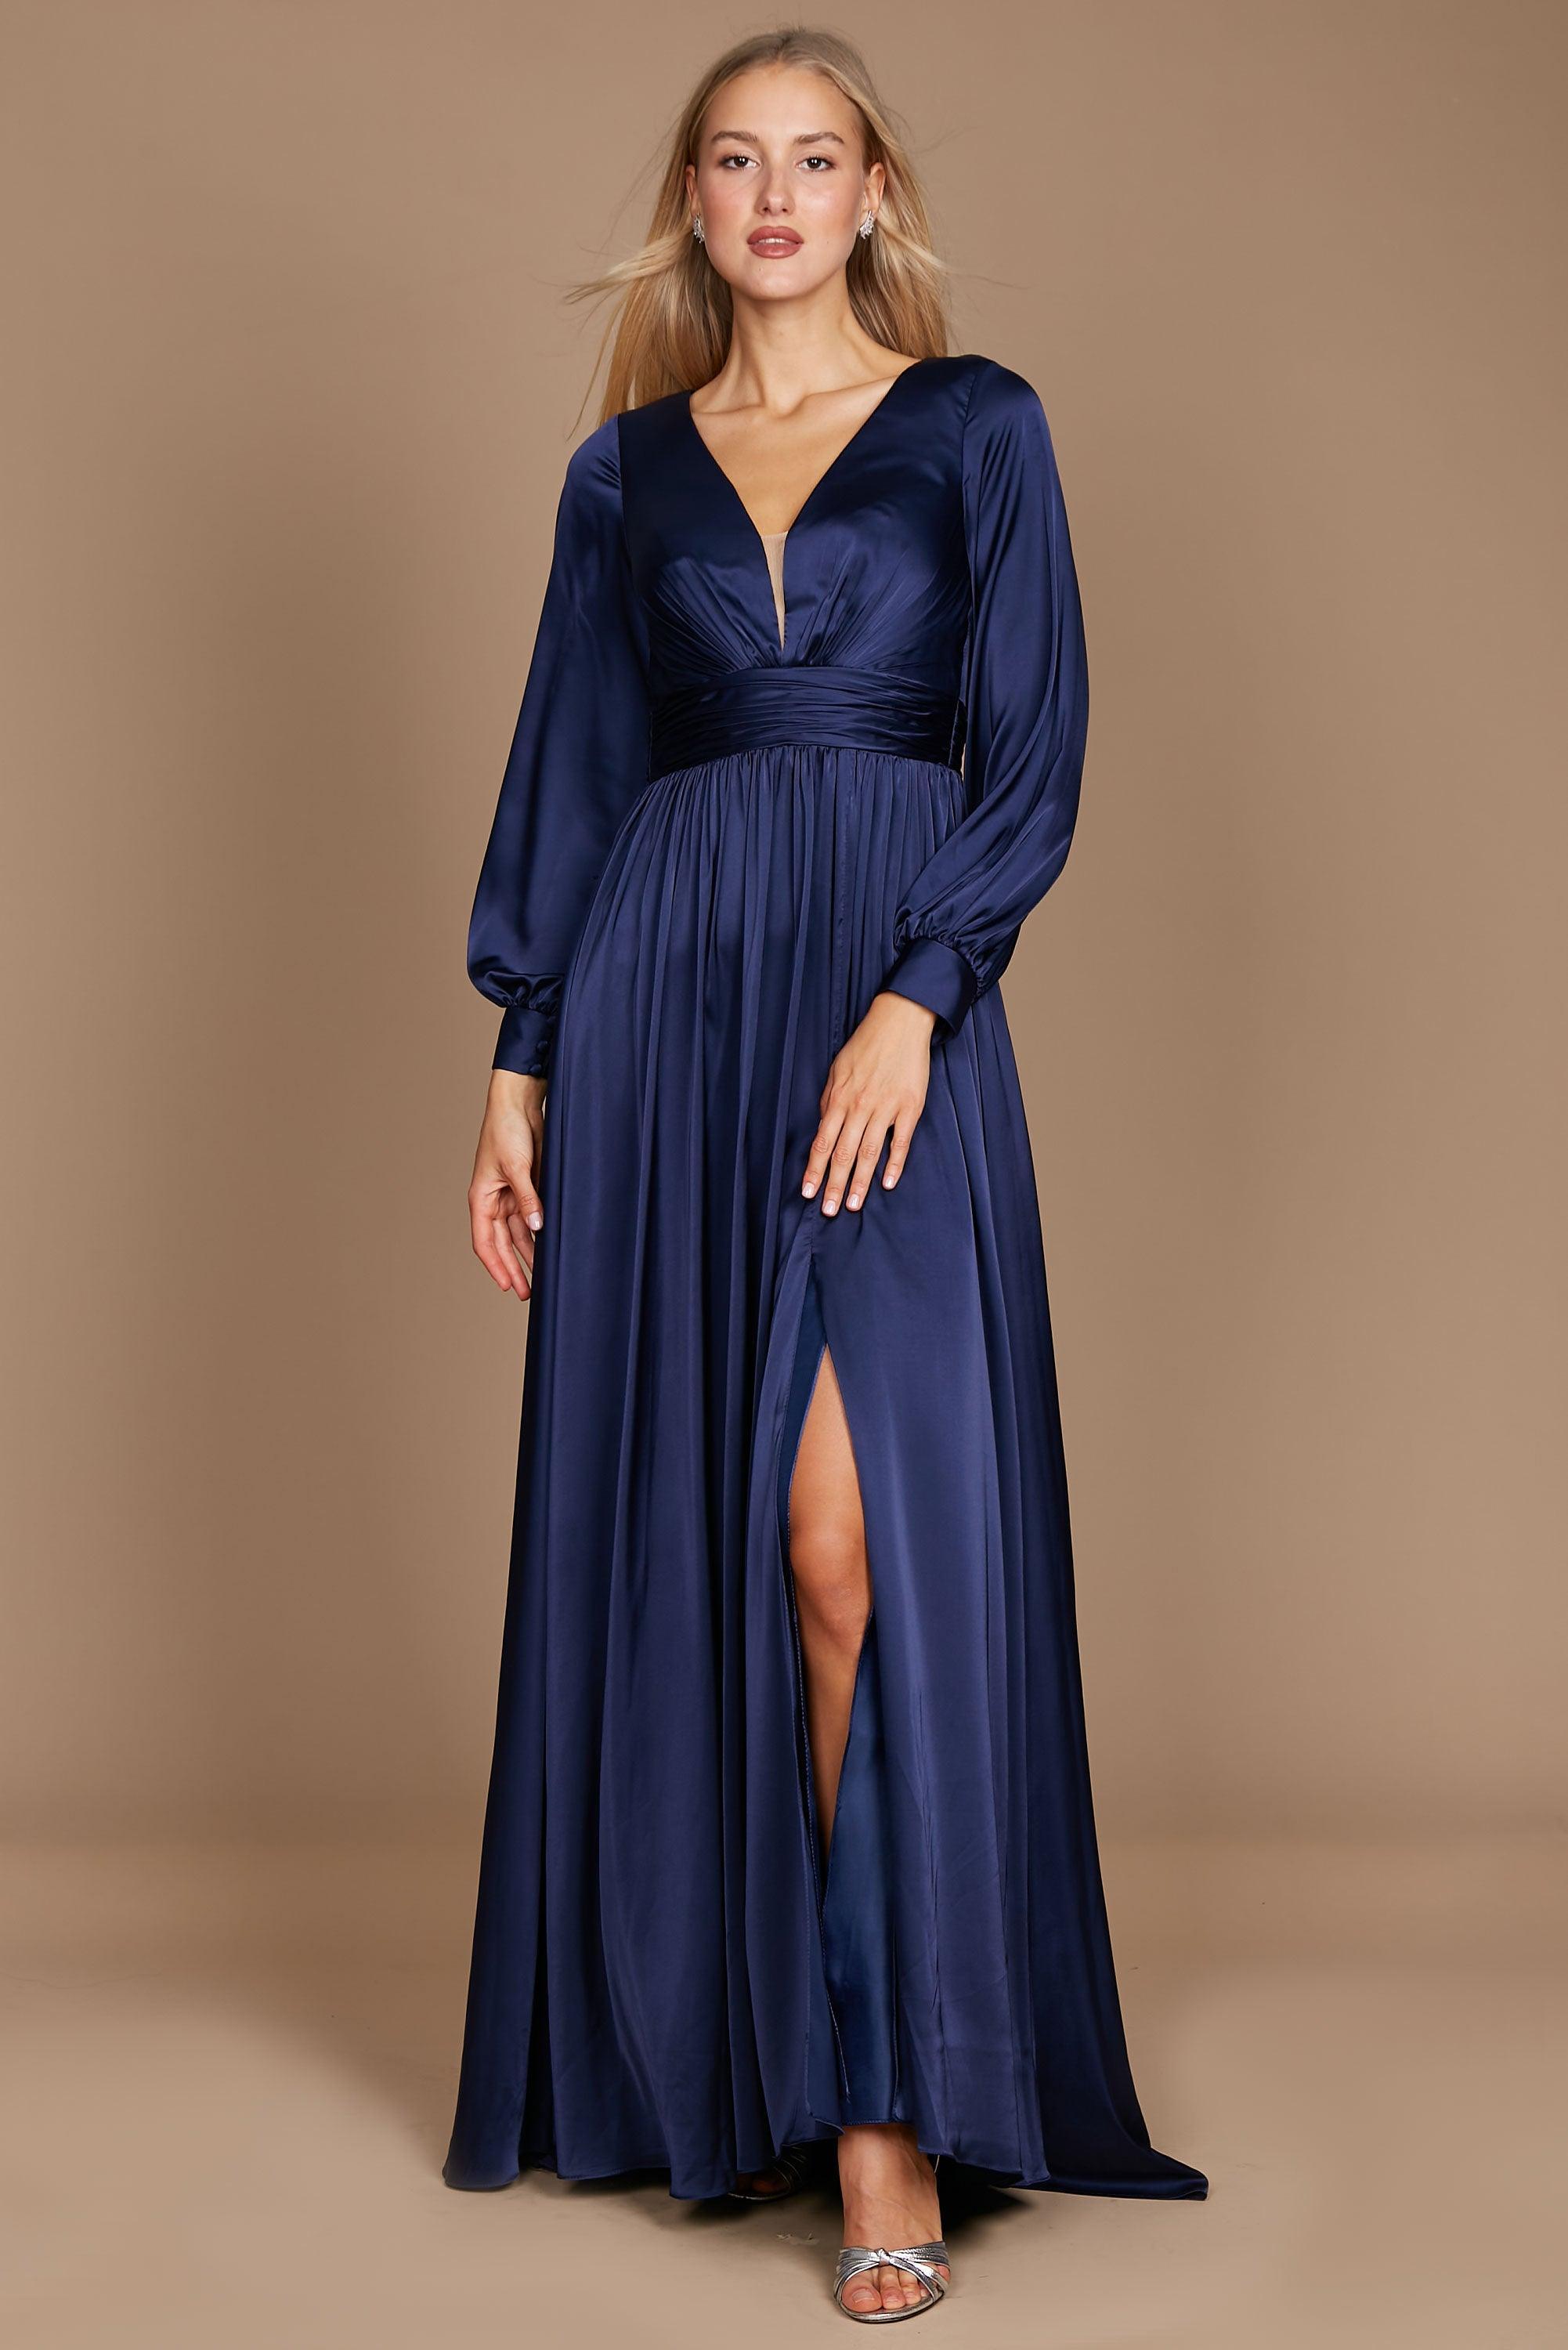 Grab Stunning Long Mother of Bride Dresses - The Dress Outlet